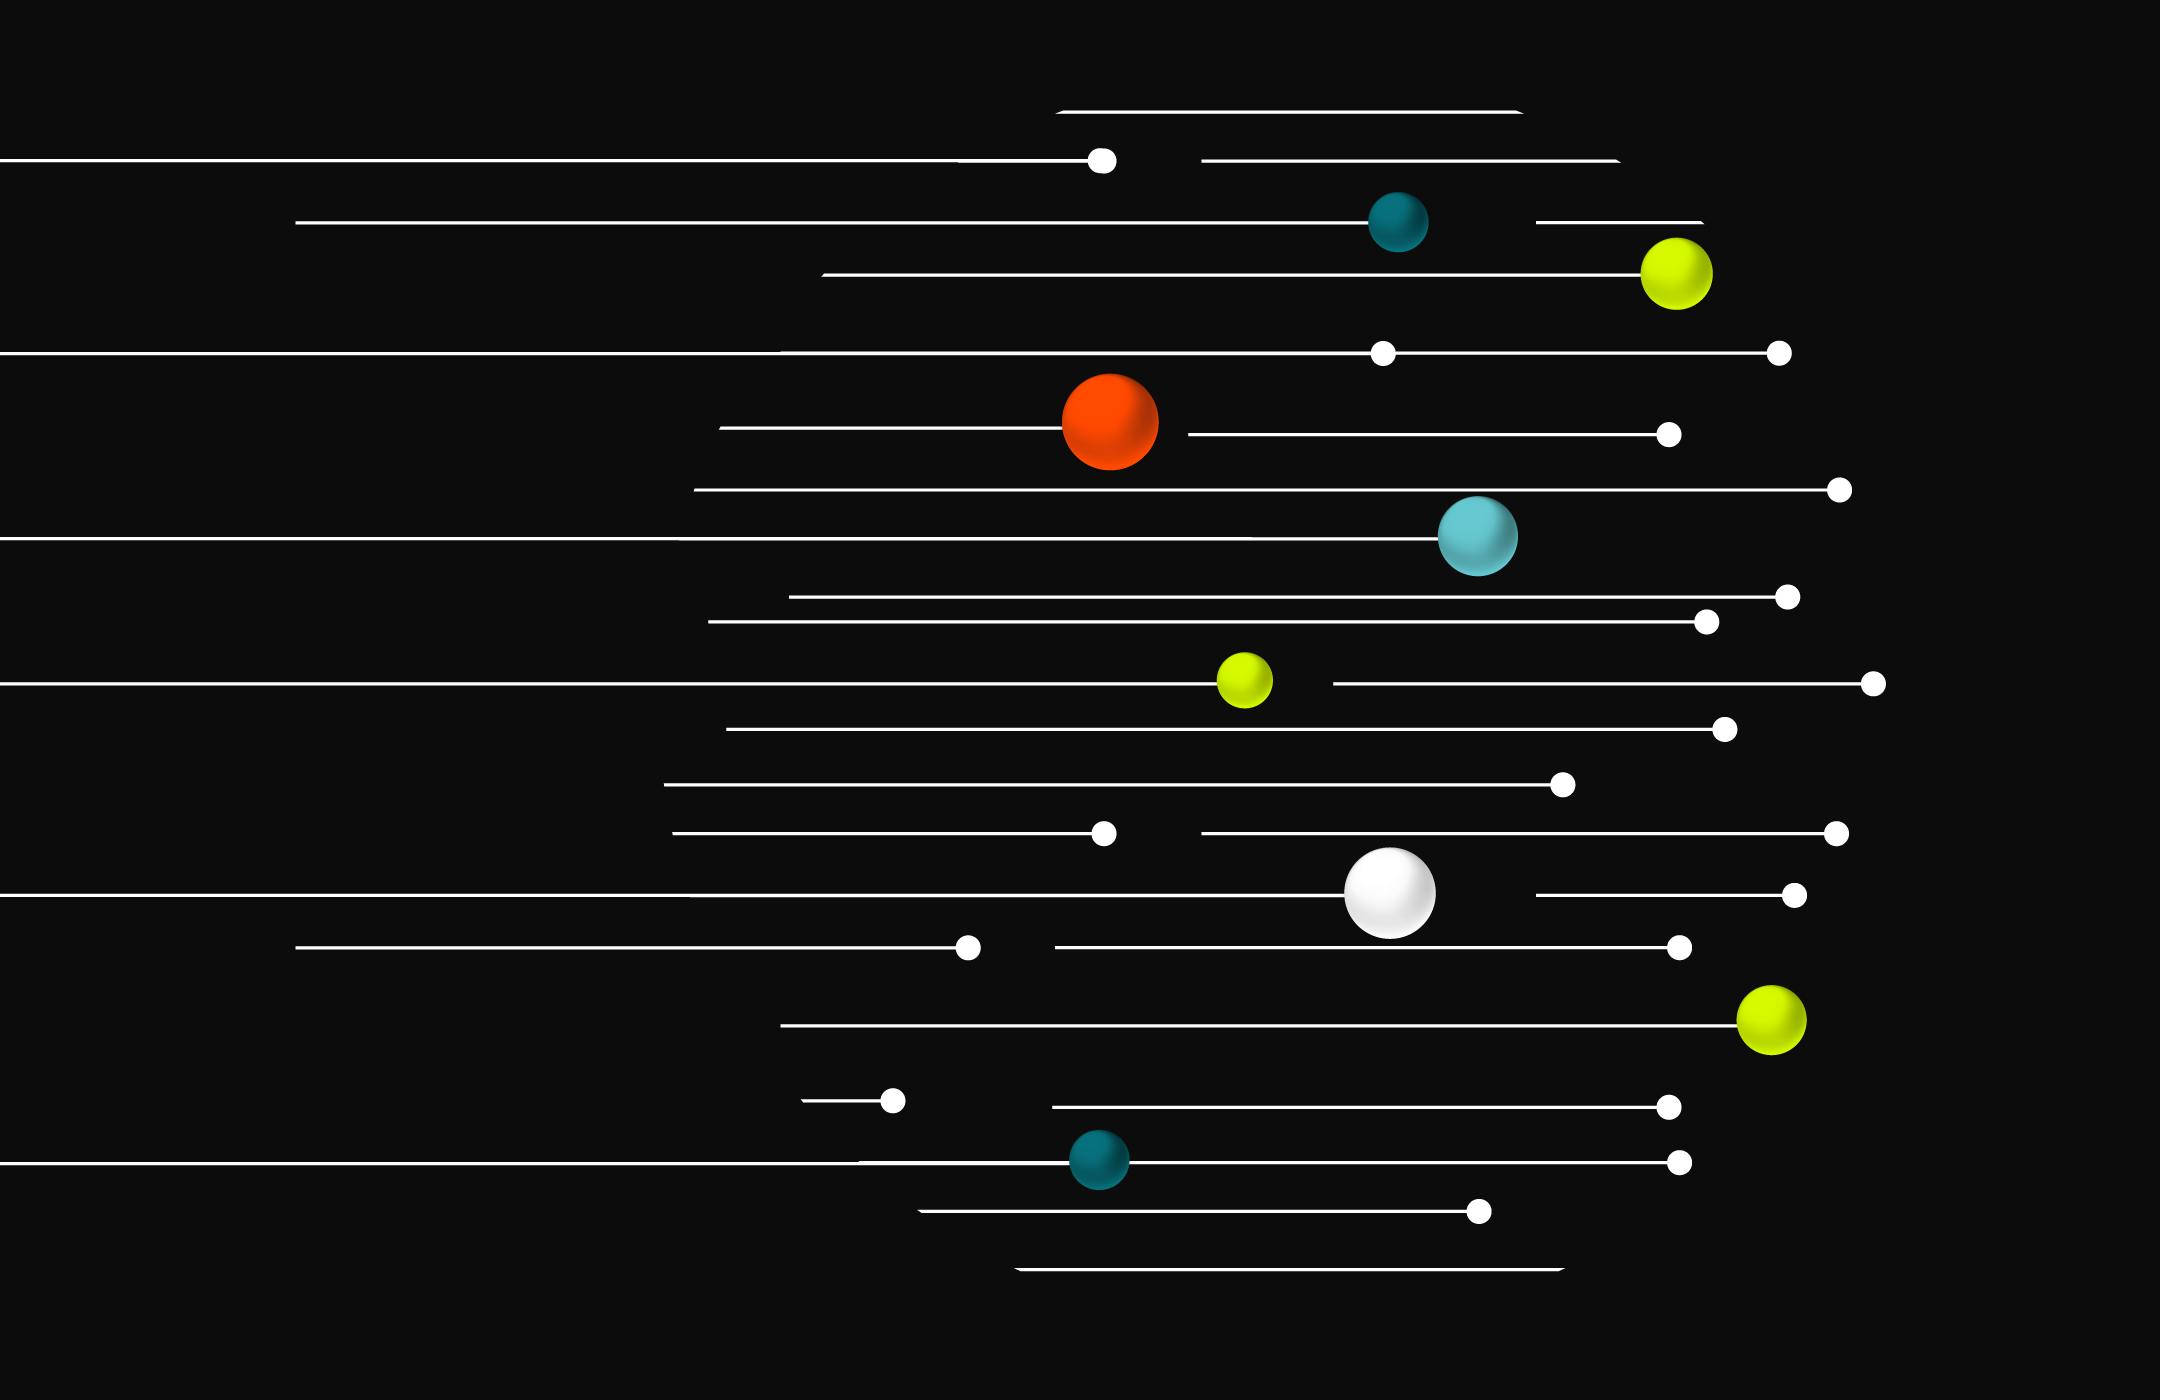 Red, yellow, teal, and white spheres and lines indicating motion towards the right on a black background.